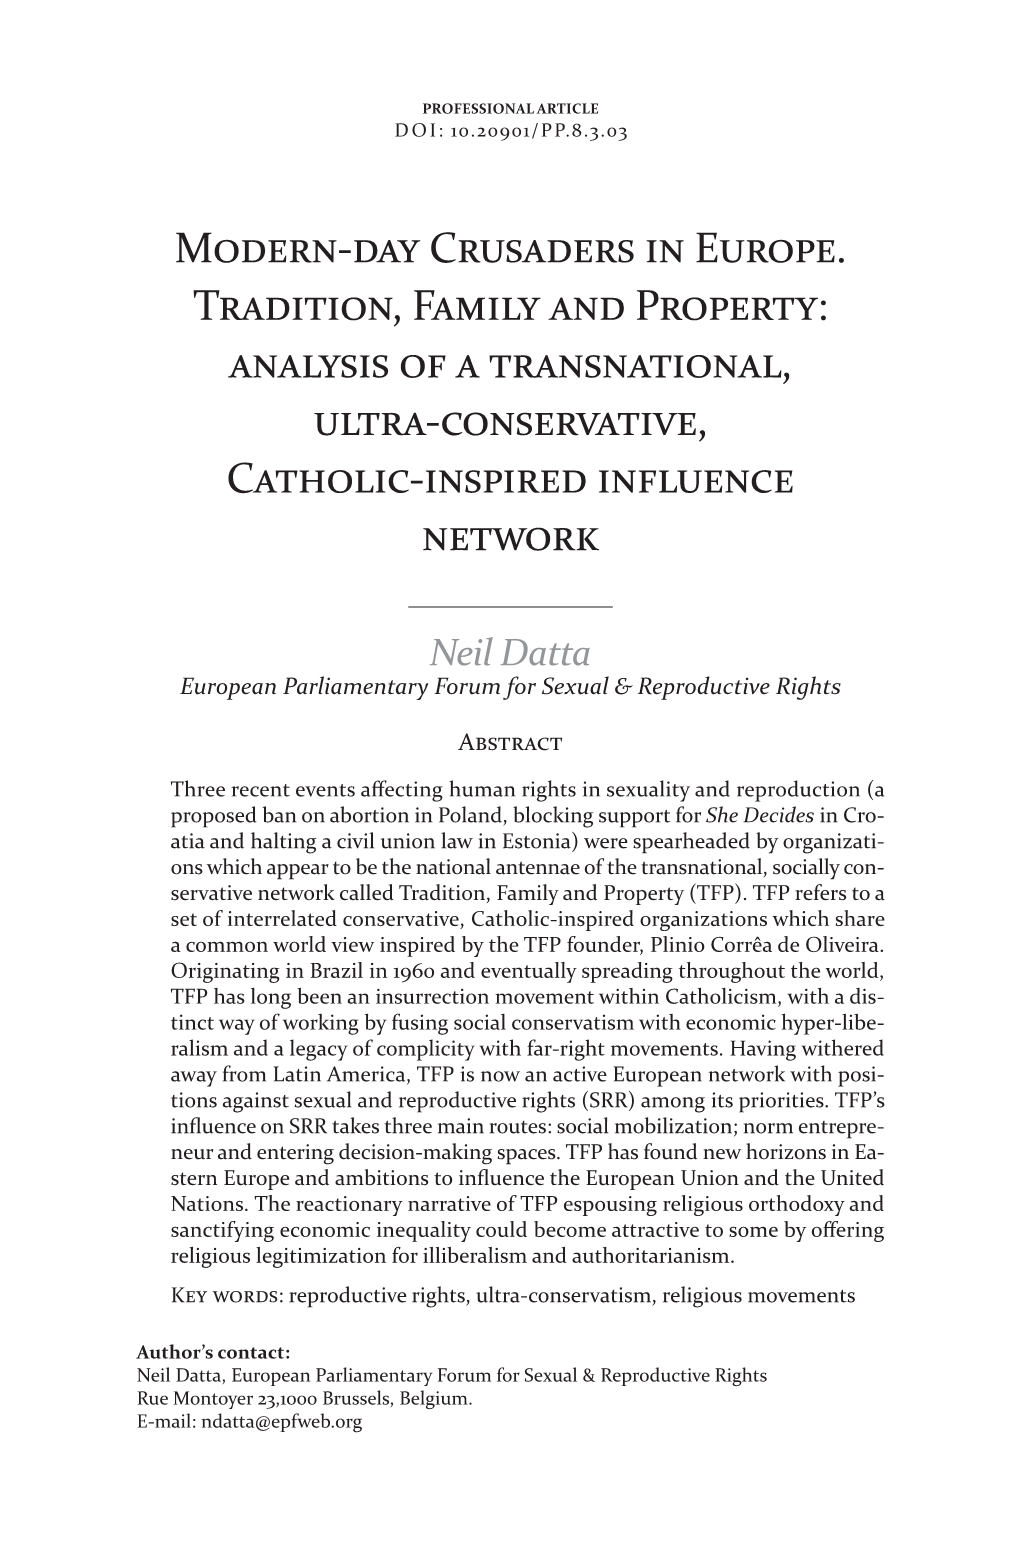 Analysis of a Transnational, Ultra-Conservative, Catholic-Inspired Influence Network